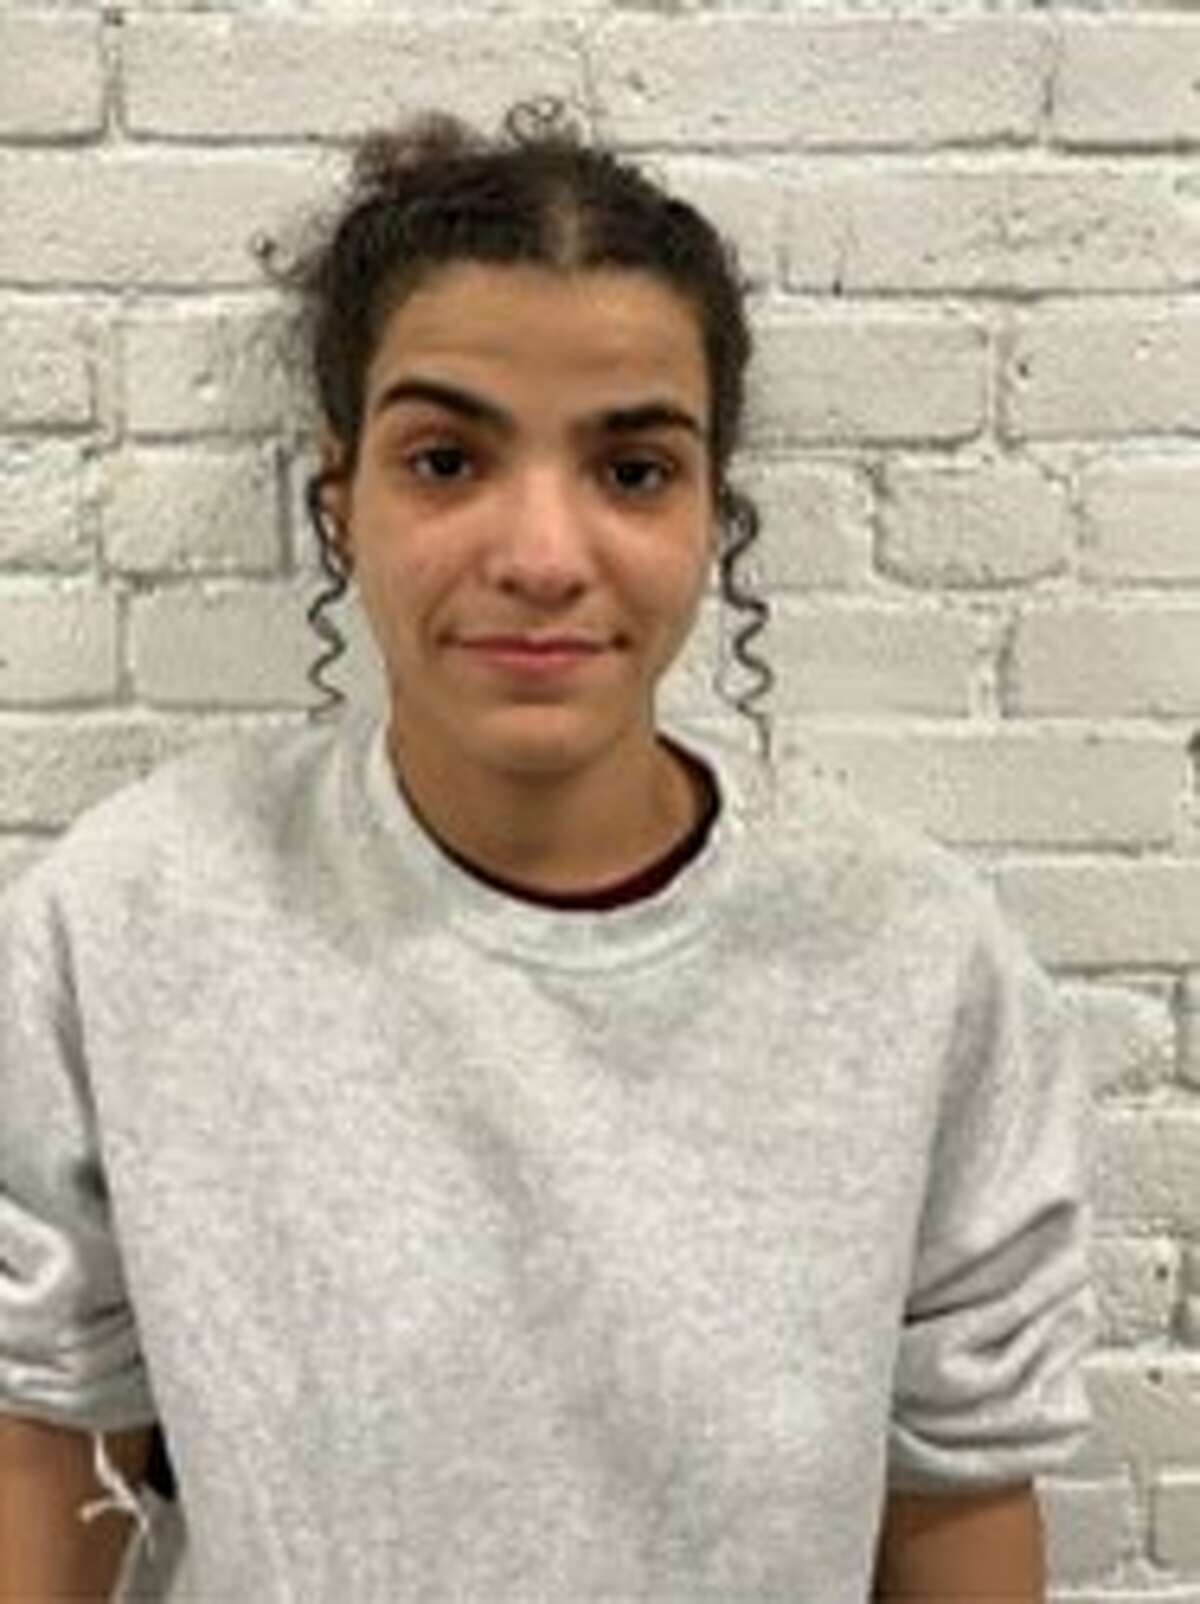 Robetsy "Betsy" Quinones, 25, of New Haven, was arrested on Feb. 22 in connection with a string of burglaries, according to Woodbridge police.